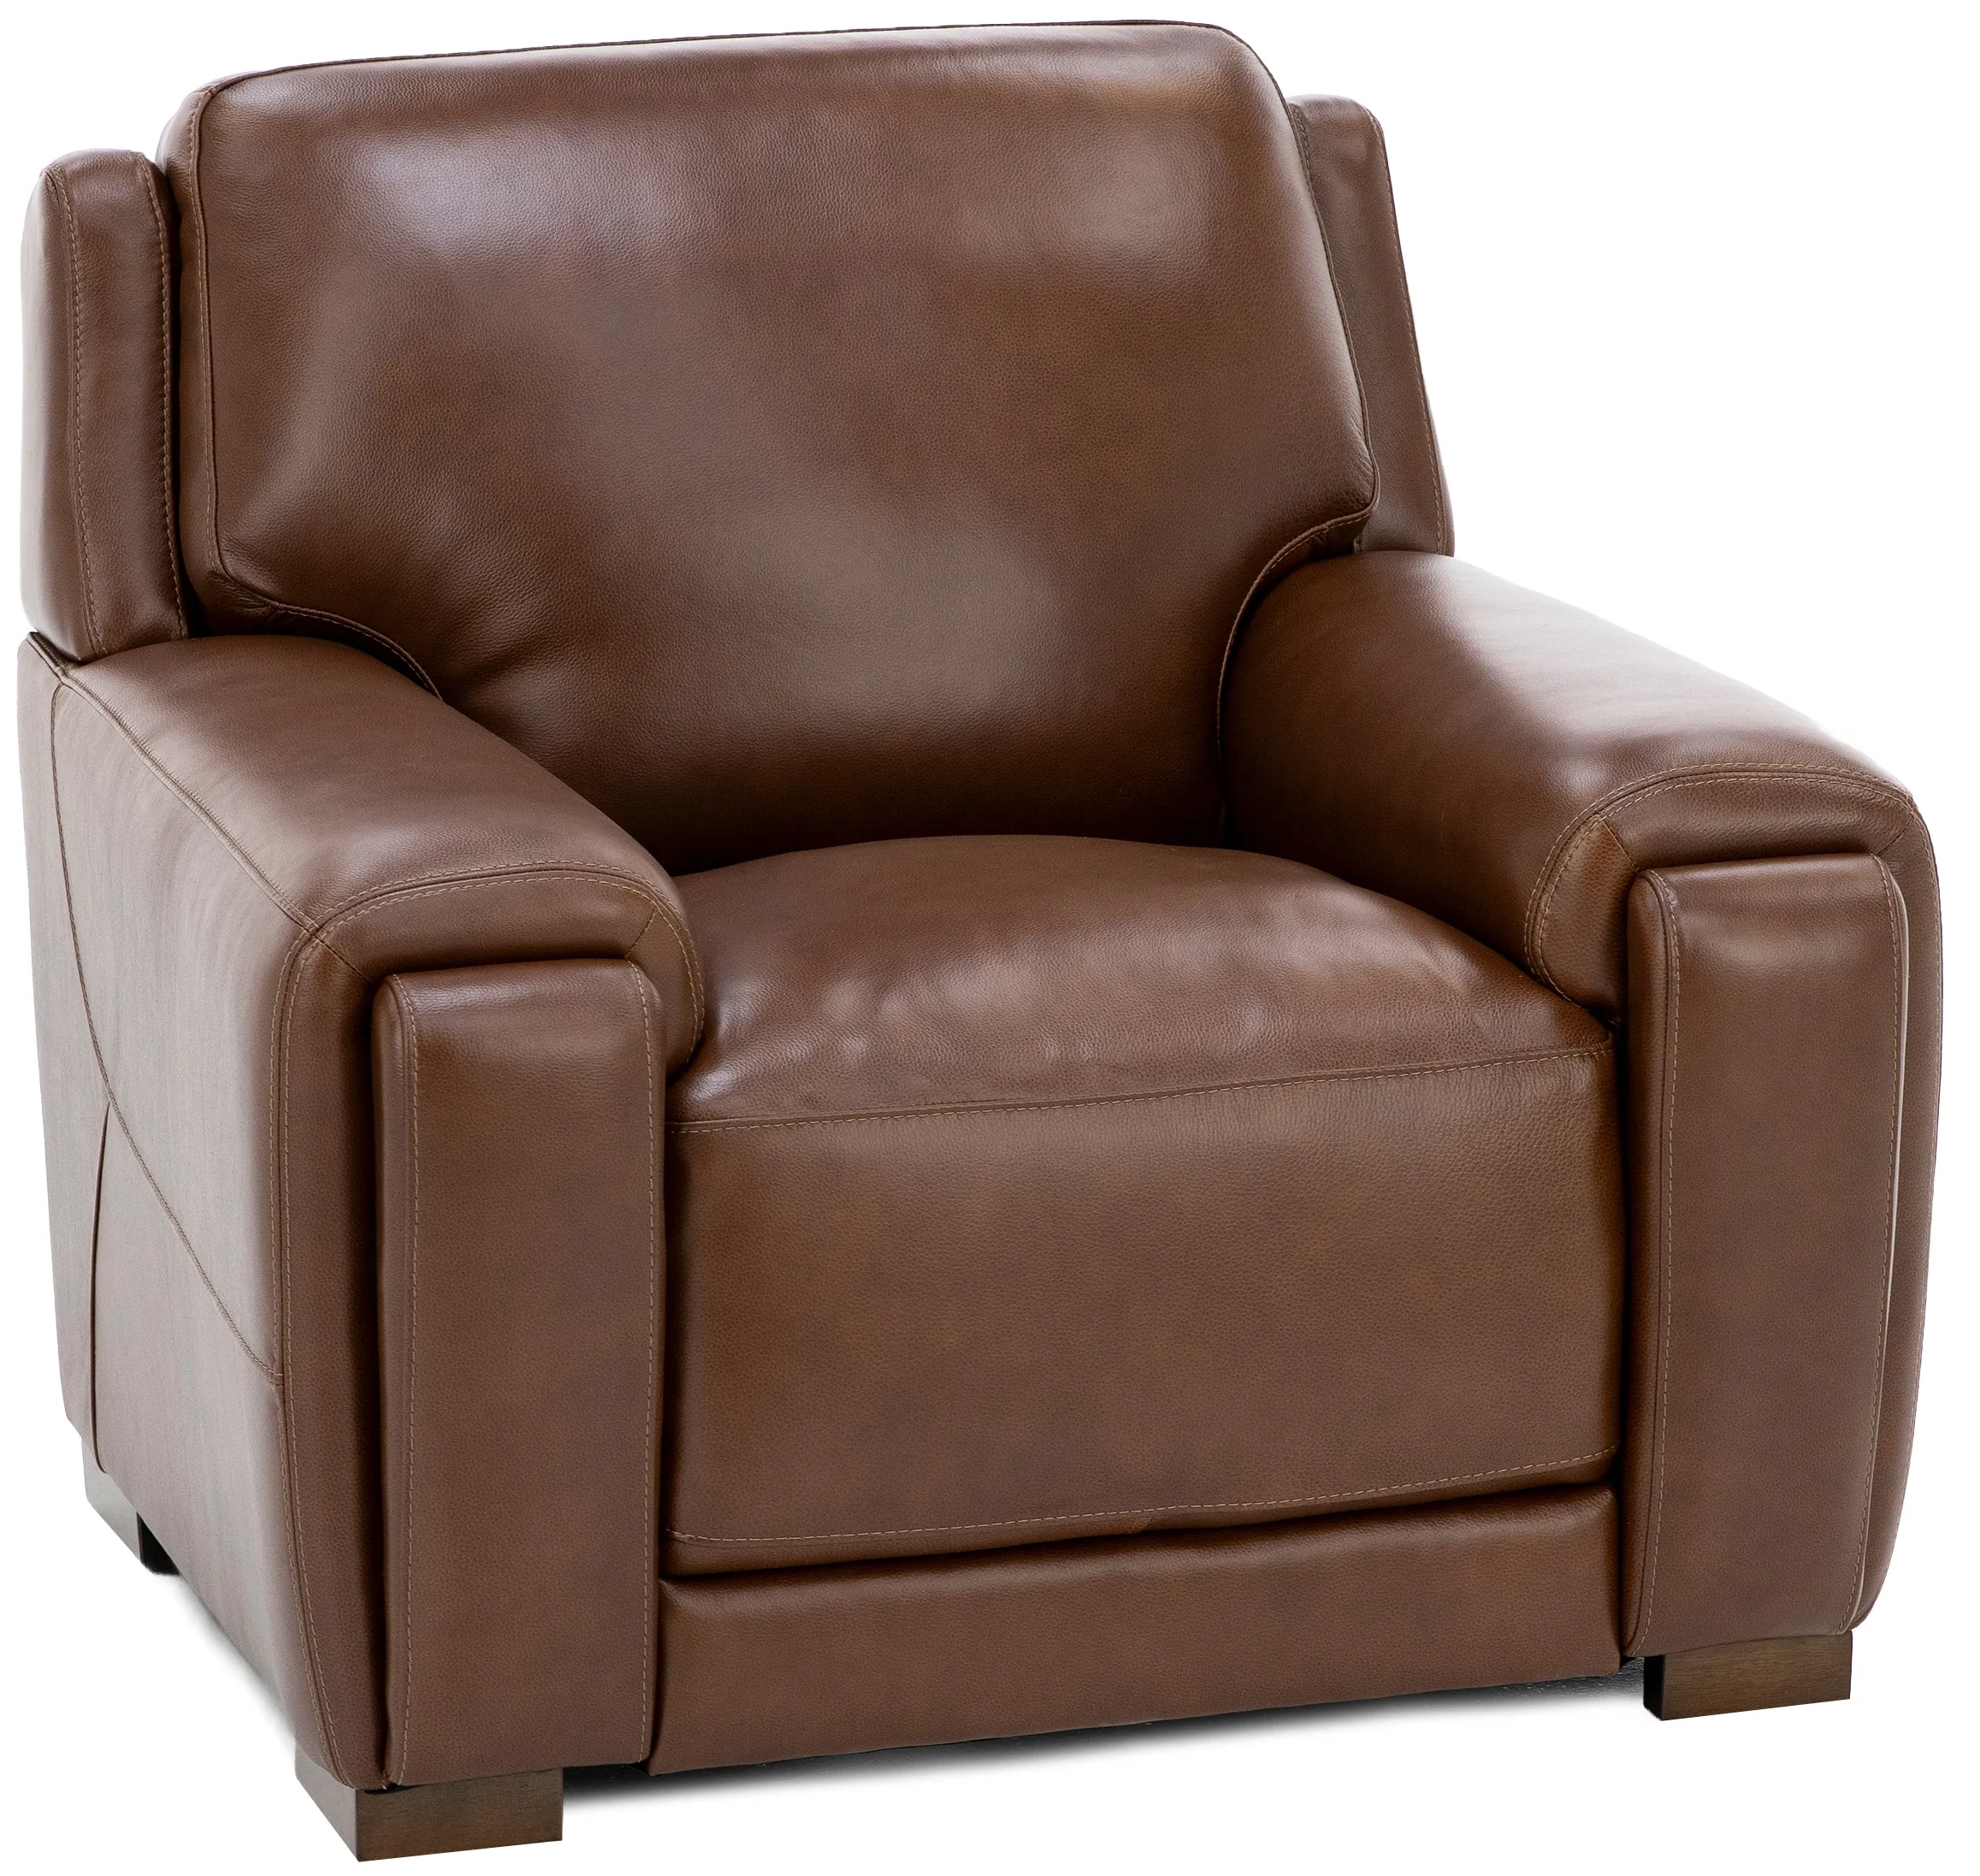 William Leather Chair With Hidden Cupholders And Chargers in Chestnut